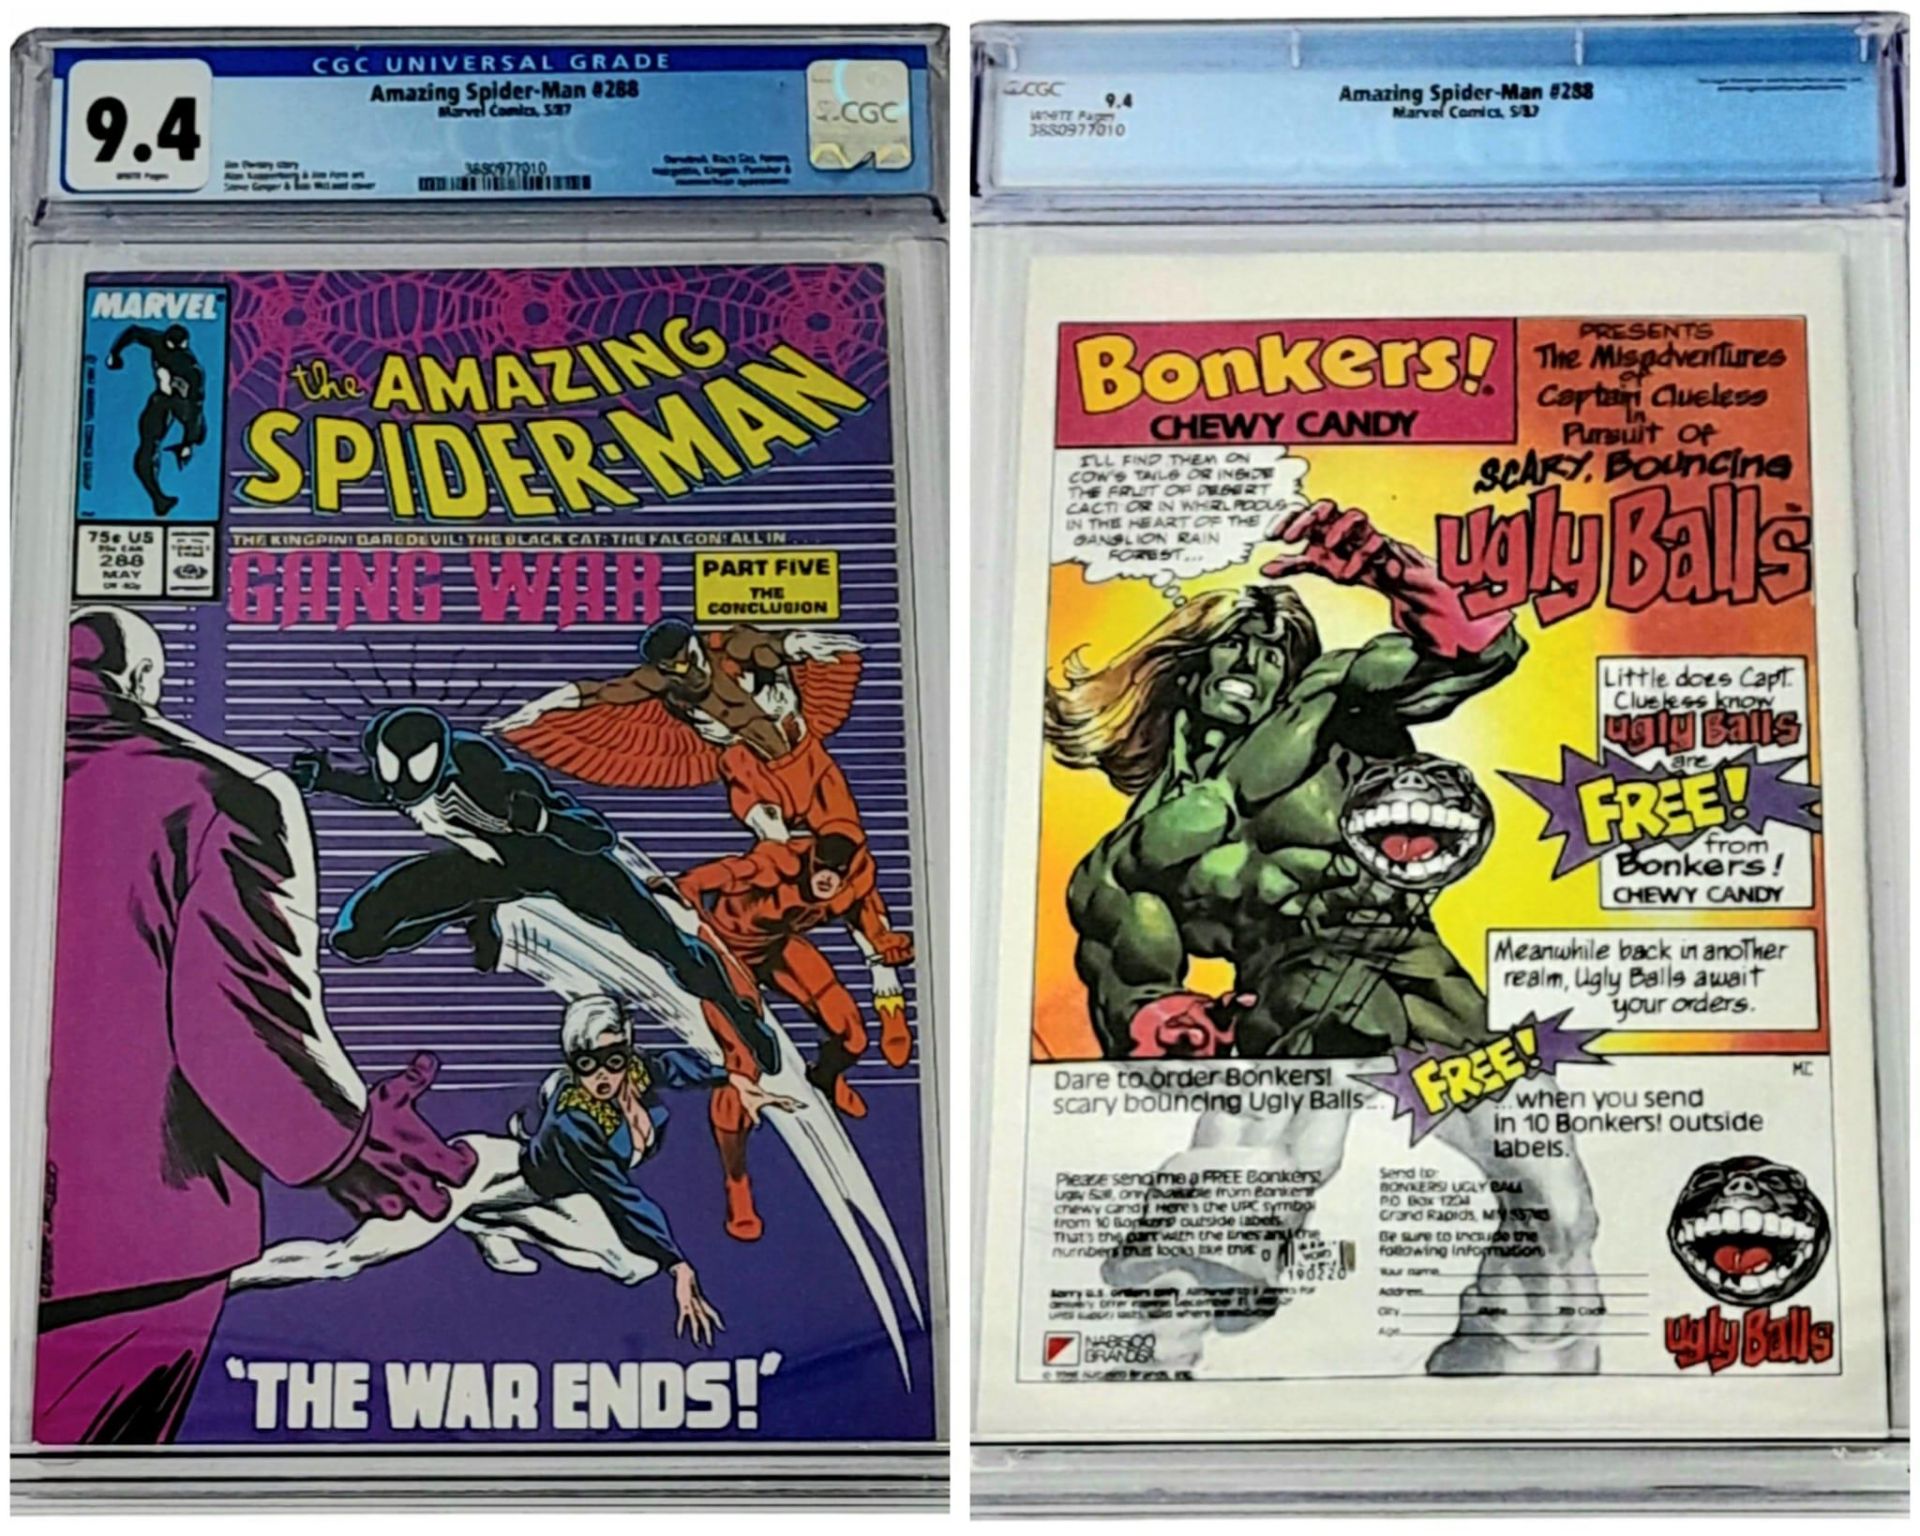 Five Very Collectible CGC Graded Comics: Spiderman #288 - 9.4 rating, Spiderman #382 - 9.4 rating, - Image 6 of 7